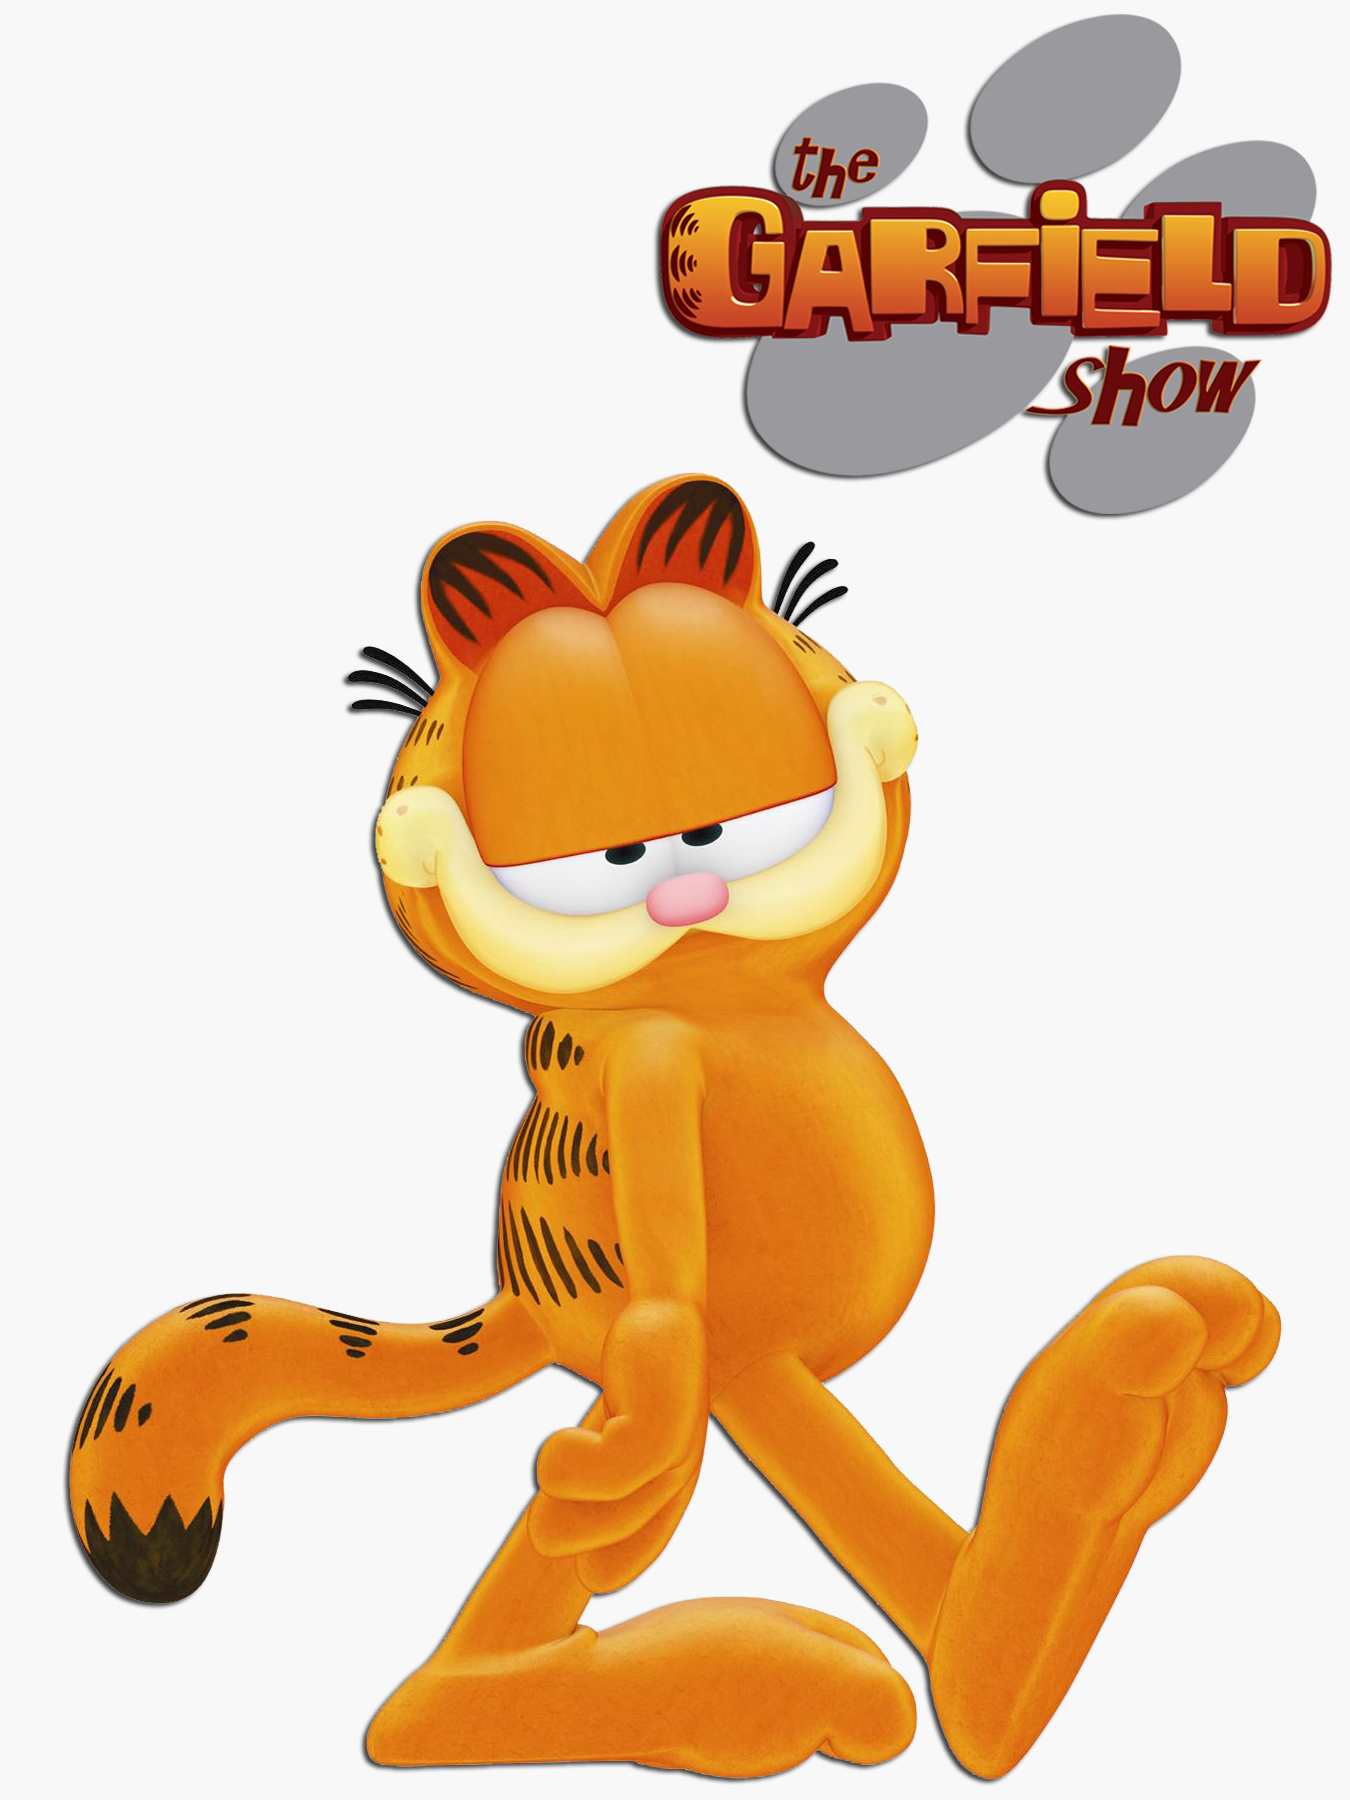 The Garfield Show - Where to Watch and Stream - TV Guide